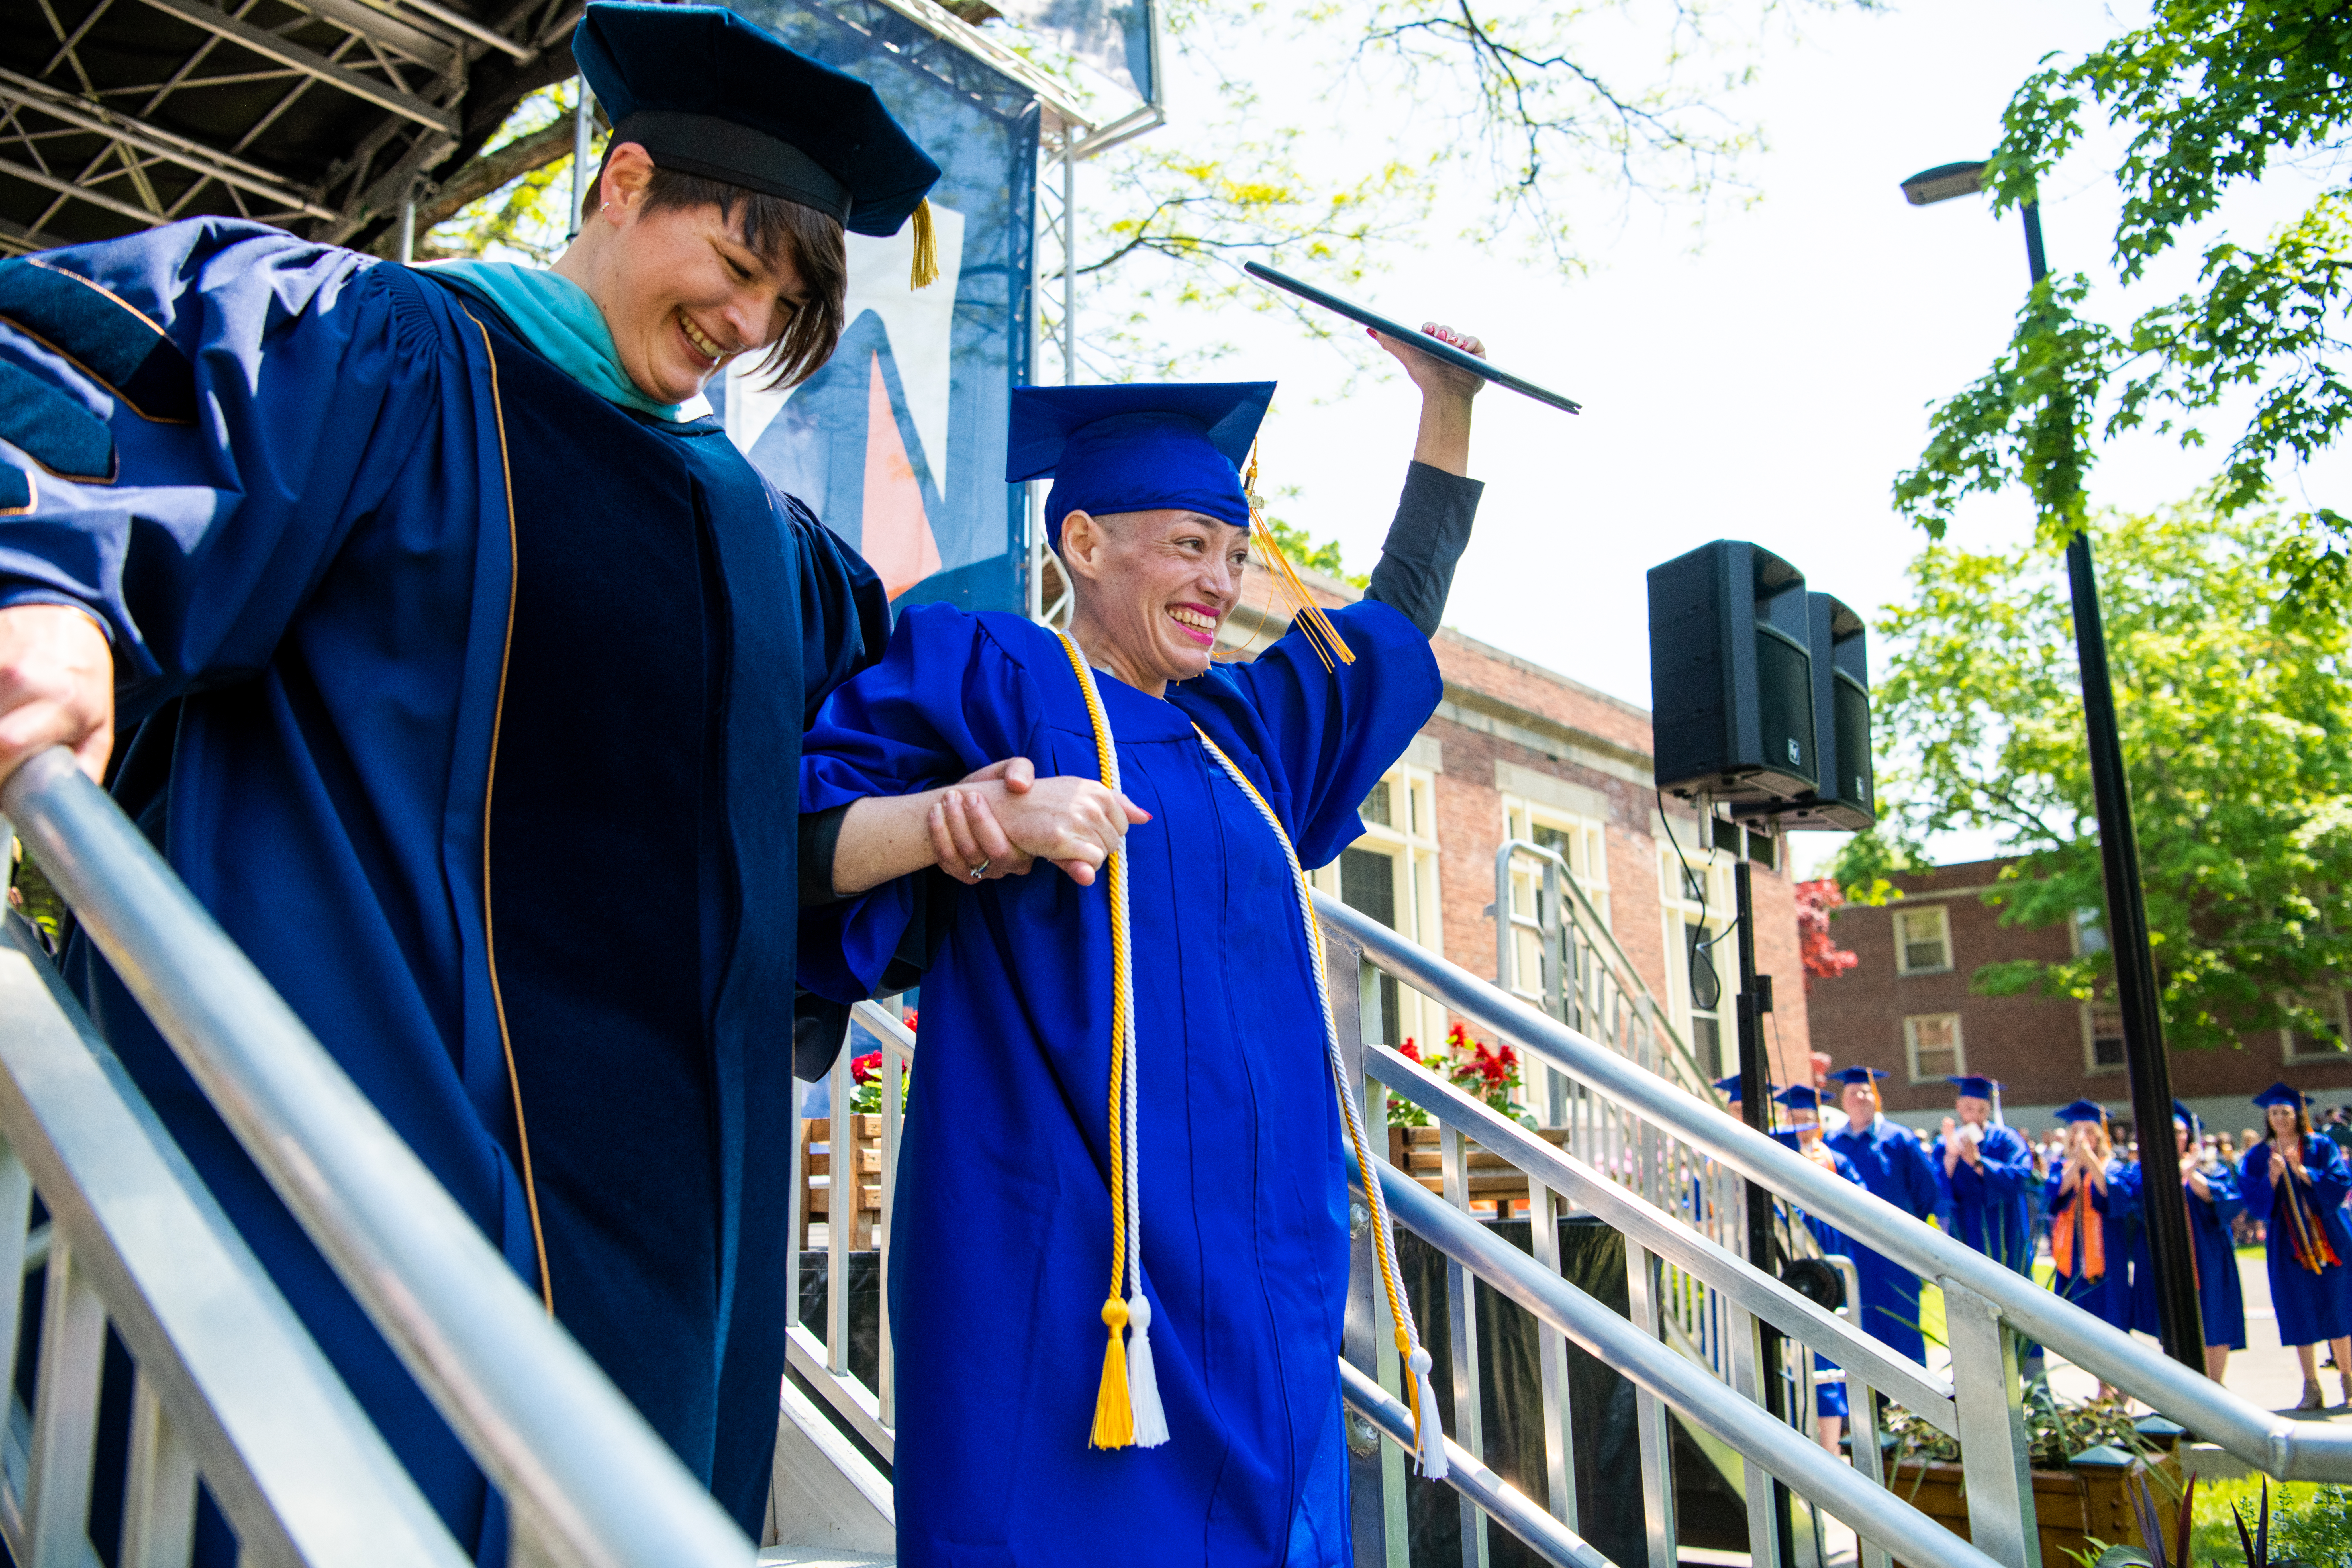 A student receiving assistance crossing the stage at a Commencement ceremony.